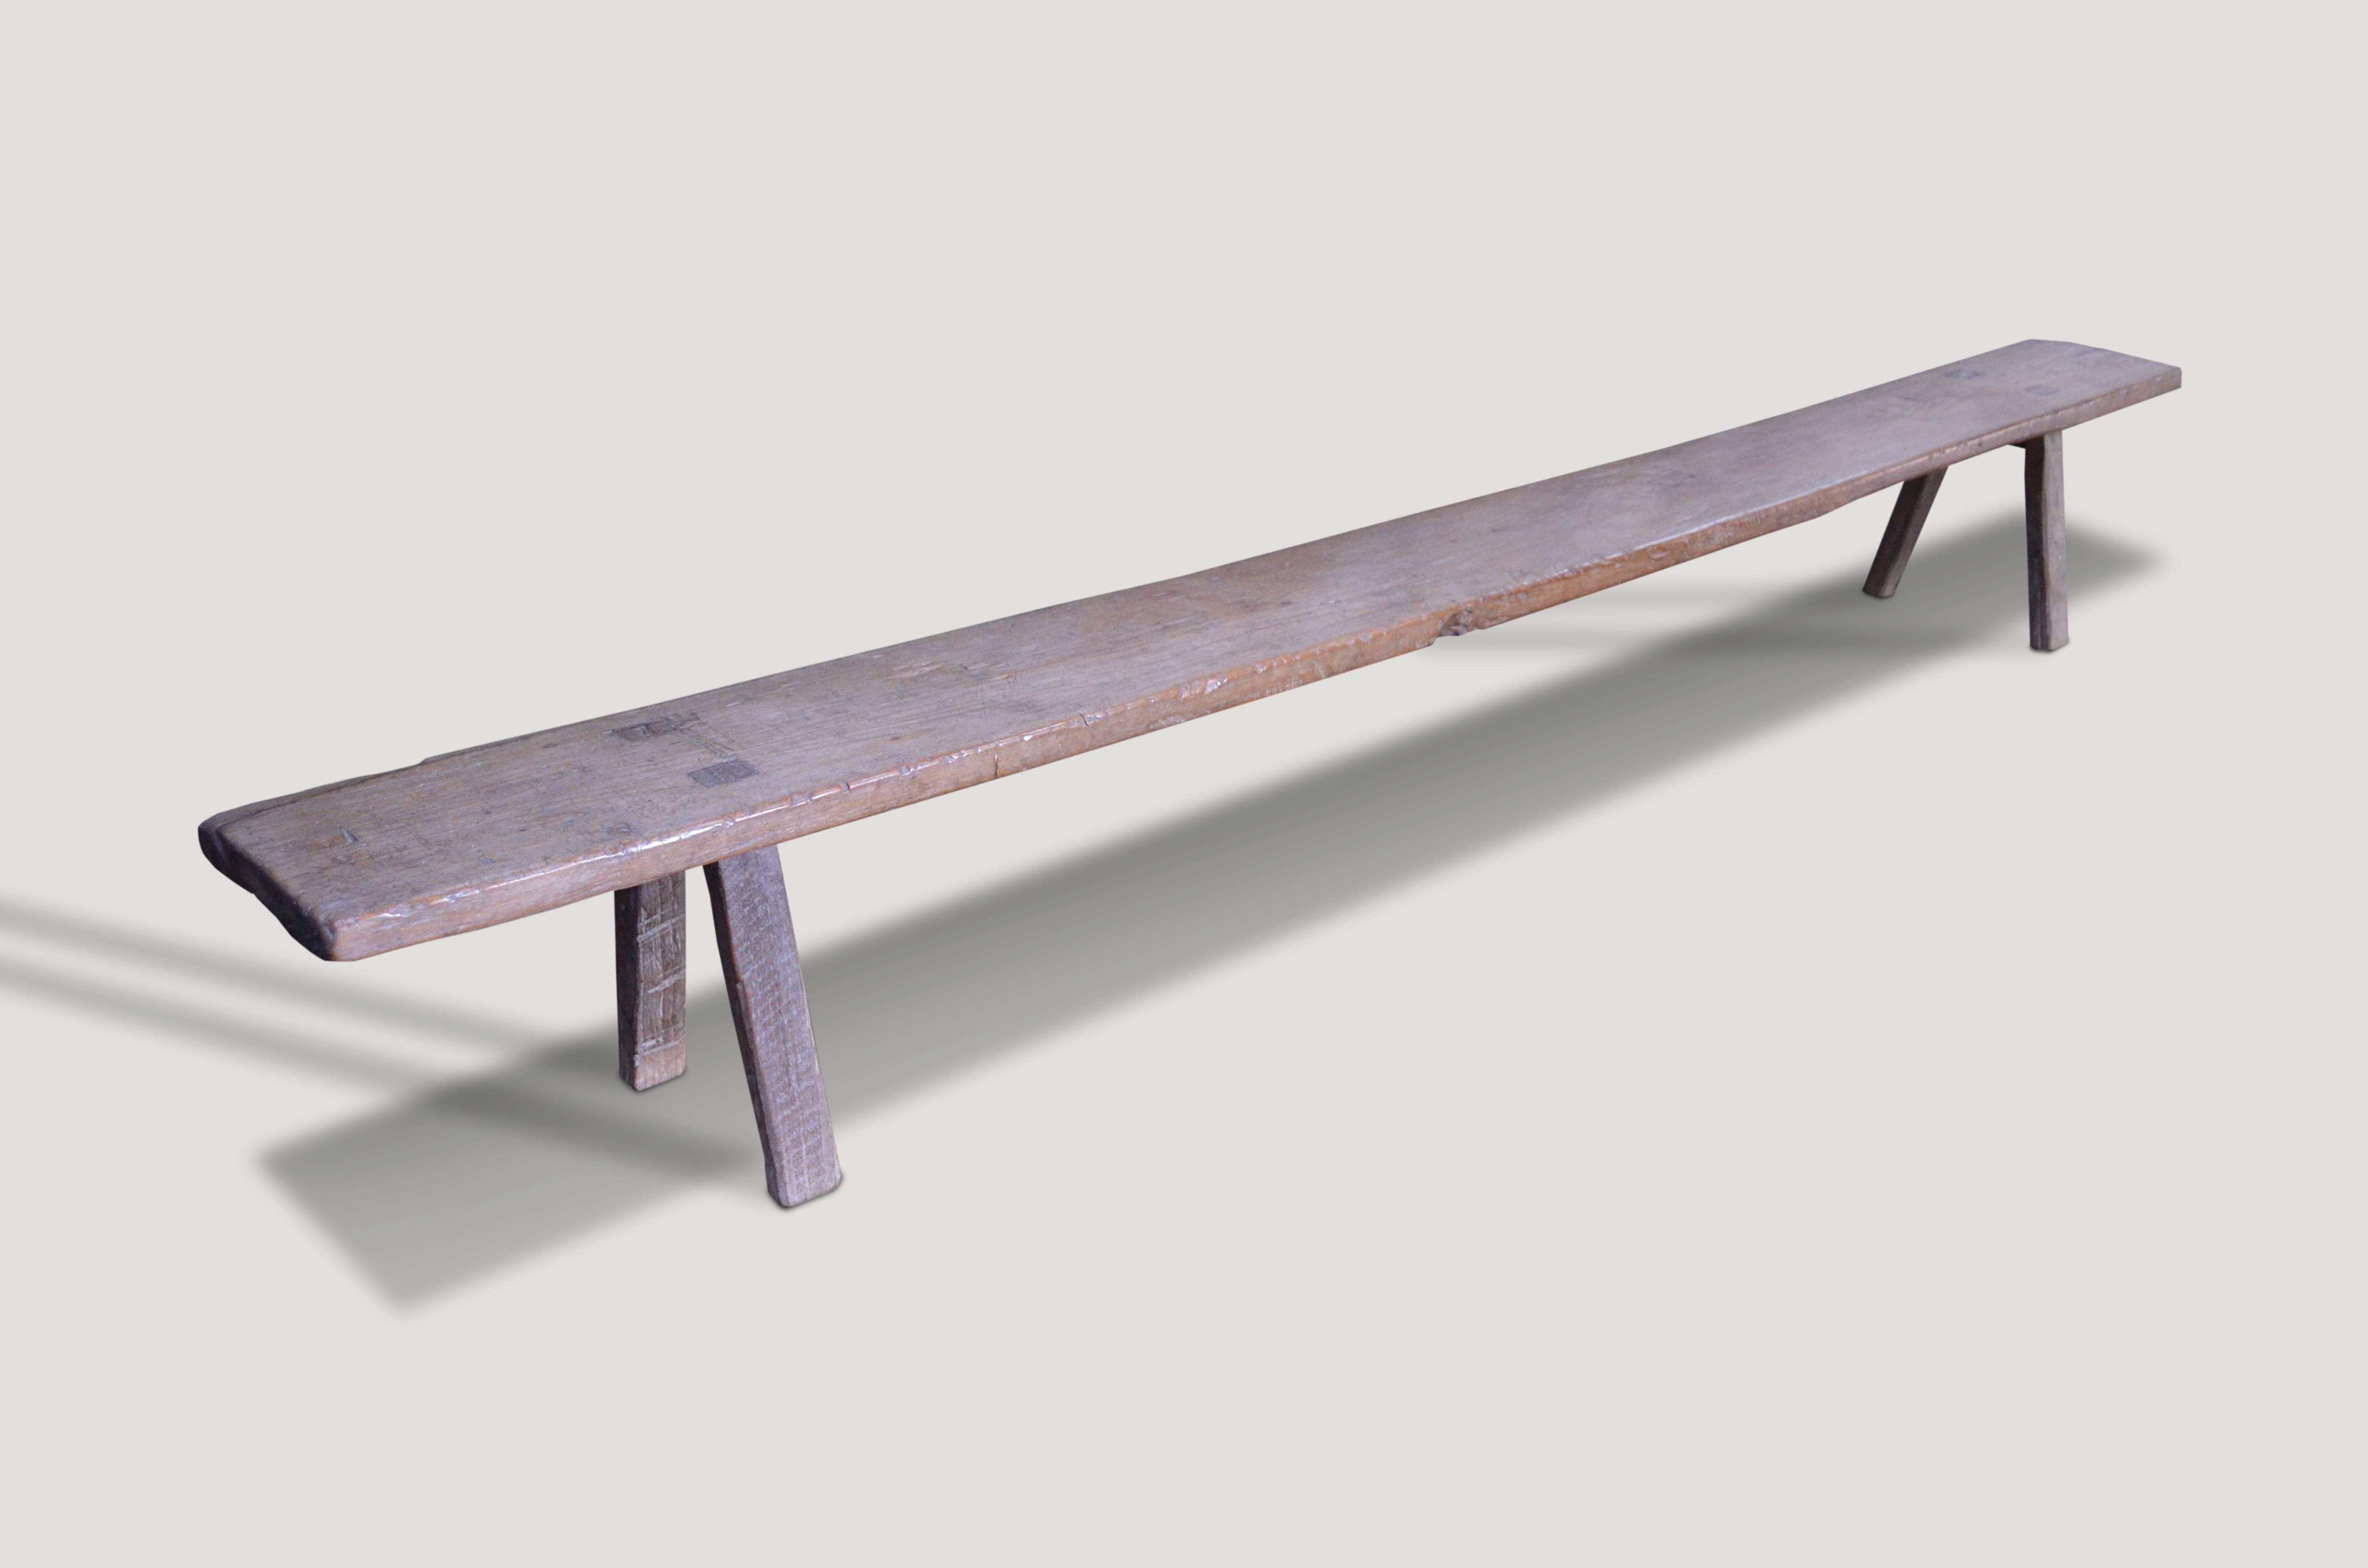 Single, aged teak wood panel bench or shelf with beautiful patina.

This bench was sourced in the spirit of wabi-sabi, a Japanese philosophy that beauty can be found in imperfection and impermanence. It’s a beauty of things modest and humble. It’s a